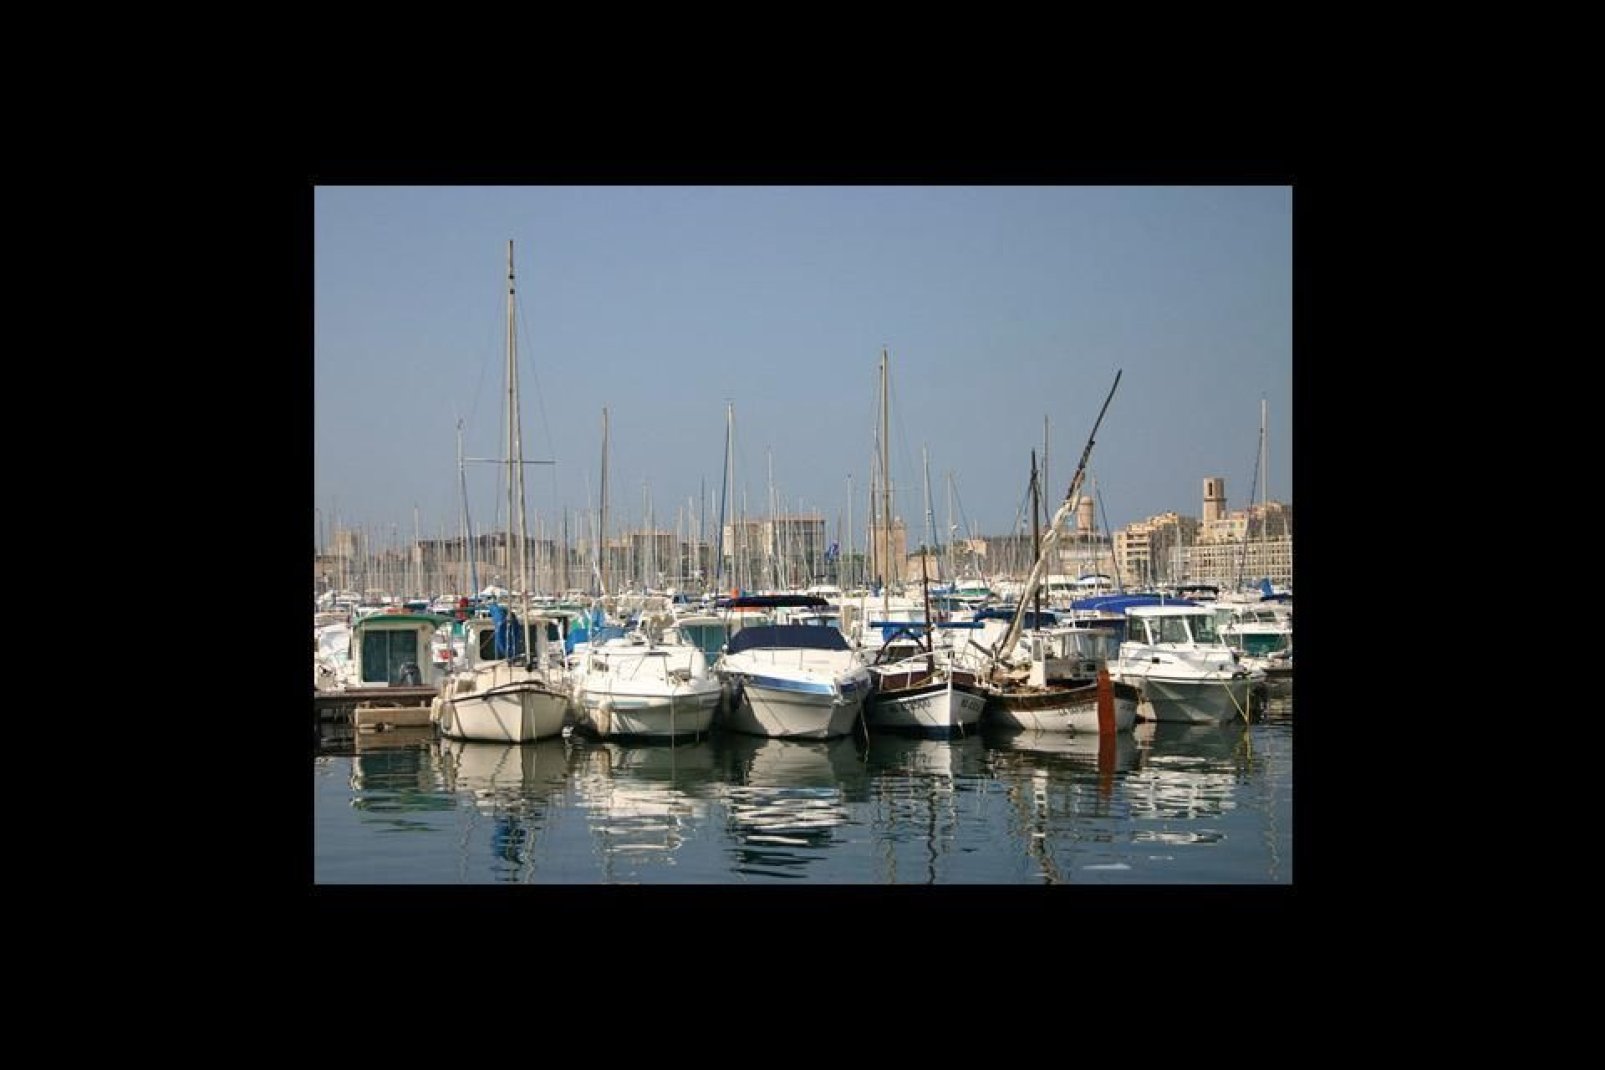 Marseille's marina, an emblematic spot where plenty of events take place.